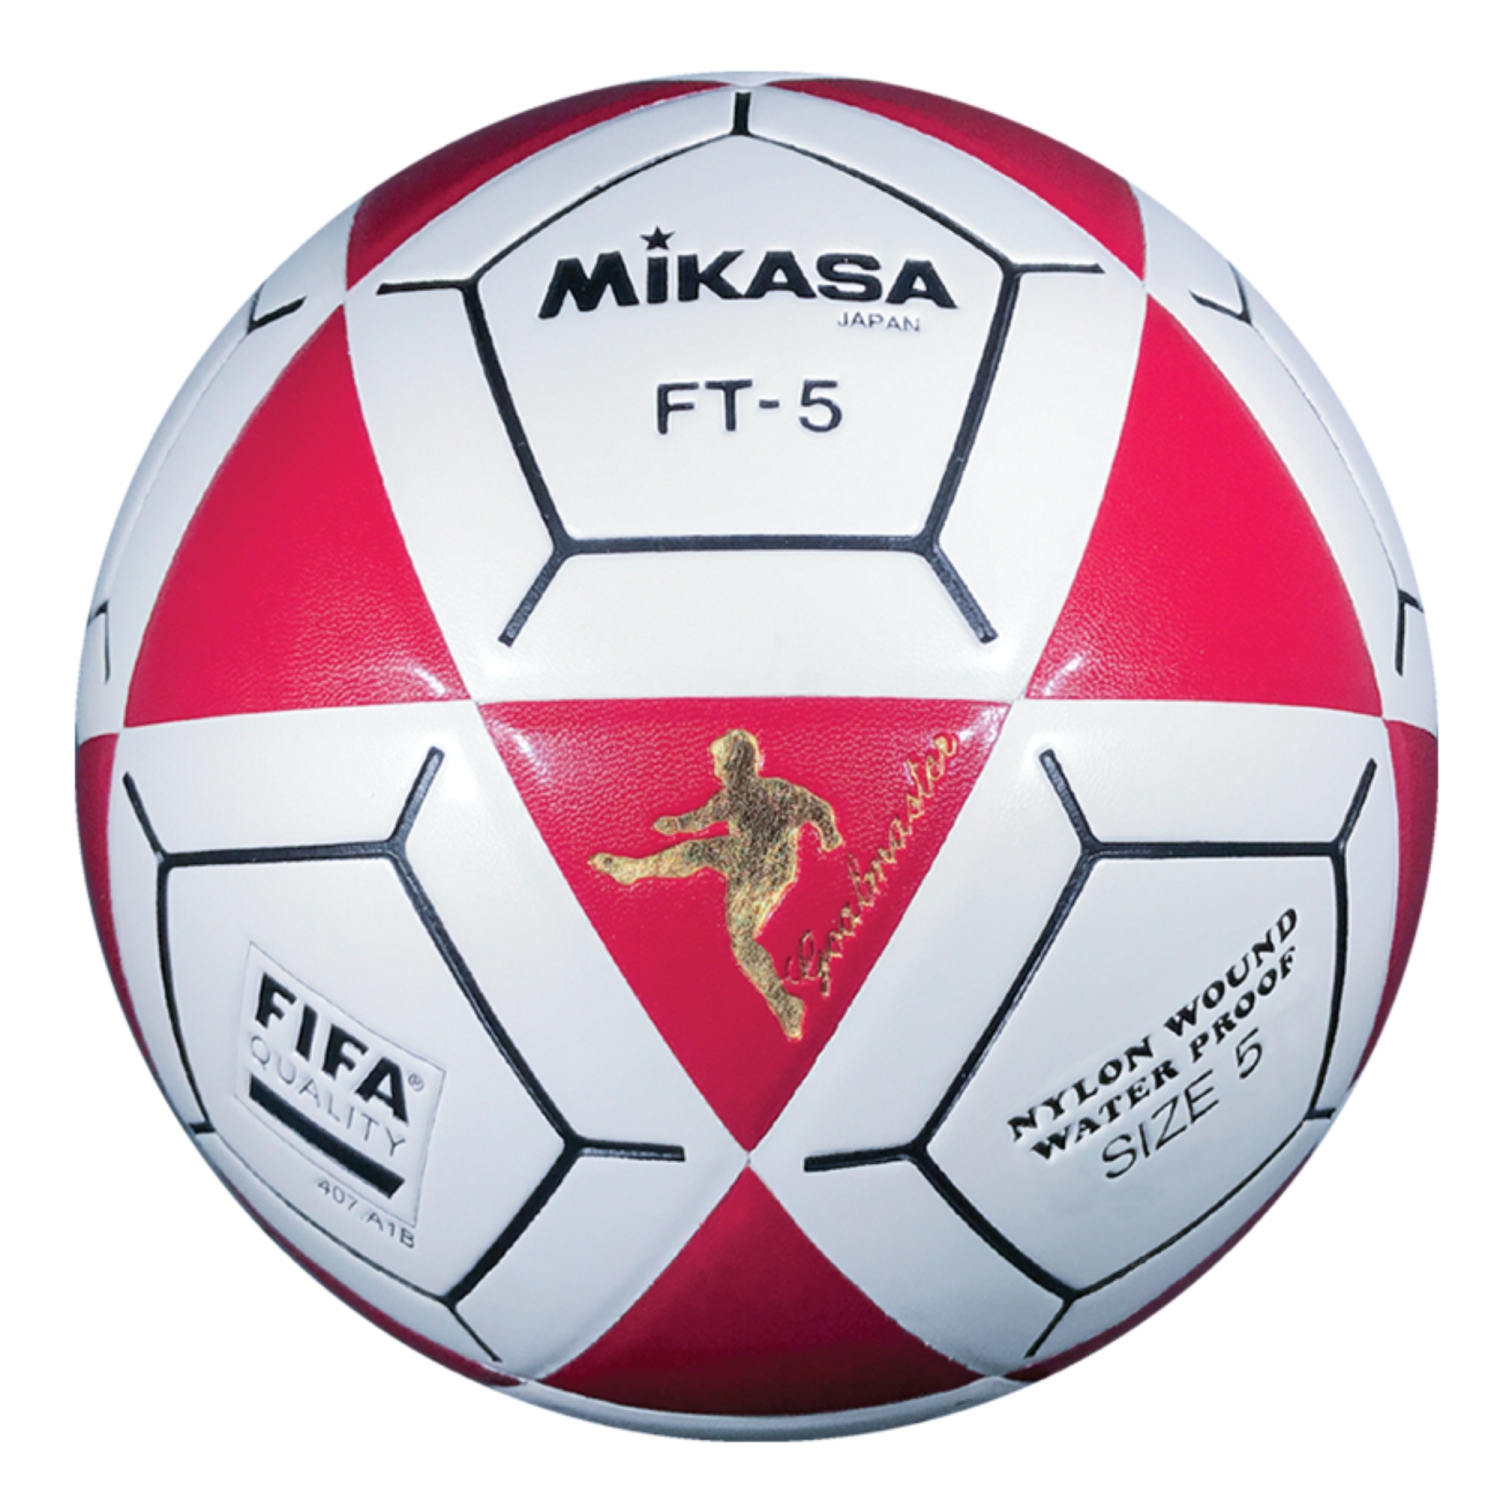 Mikasa Goal Master Soccer Ball - FT-5 Official FIFA and NFA Footvolley Size 5, Red/White